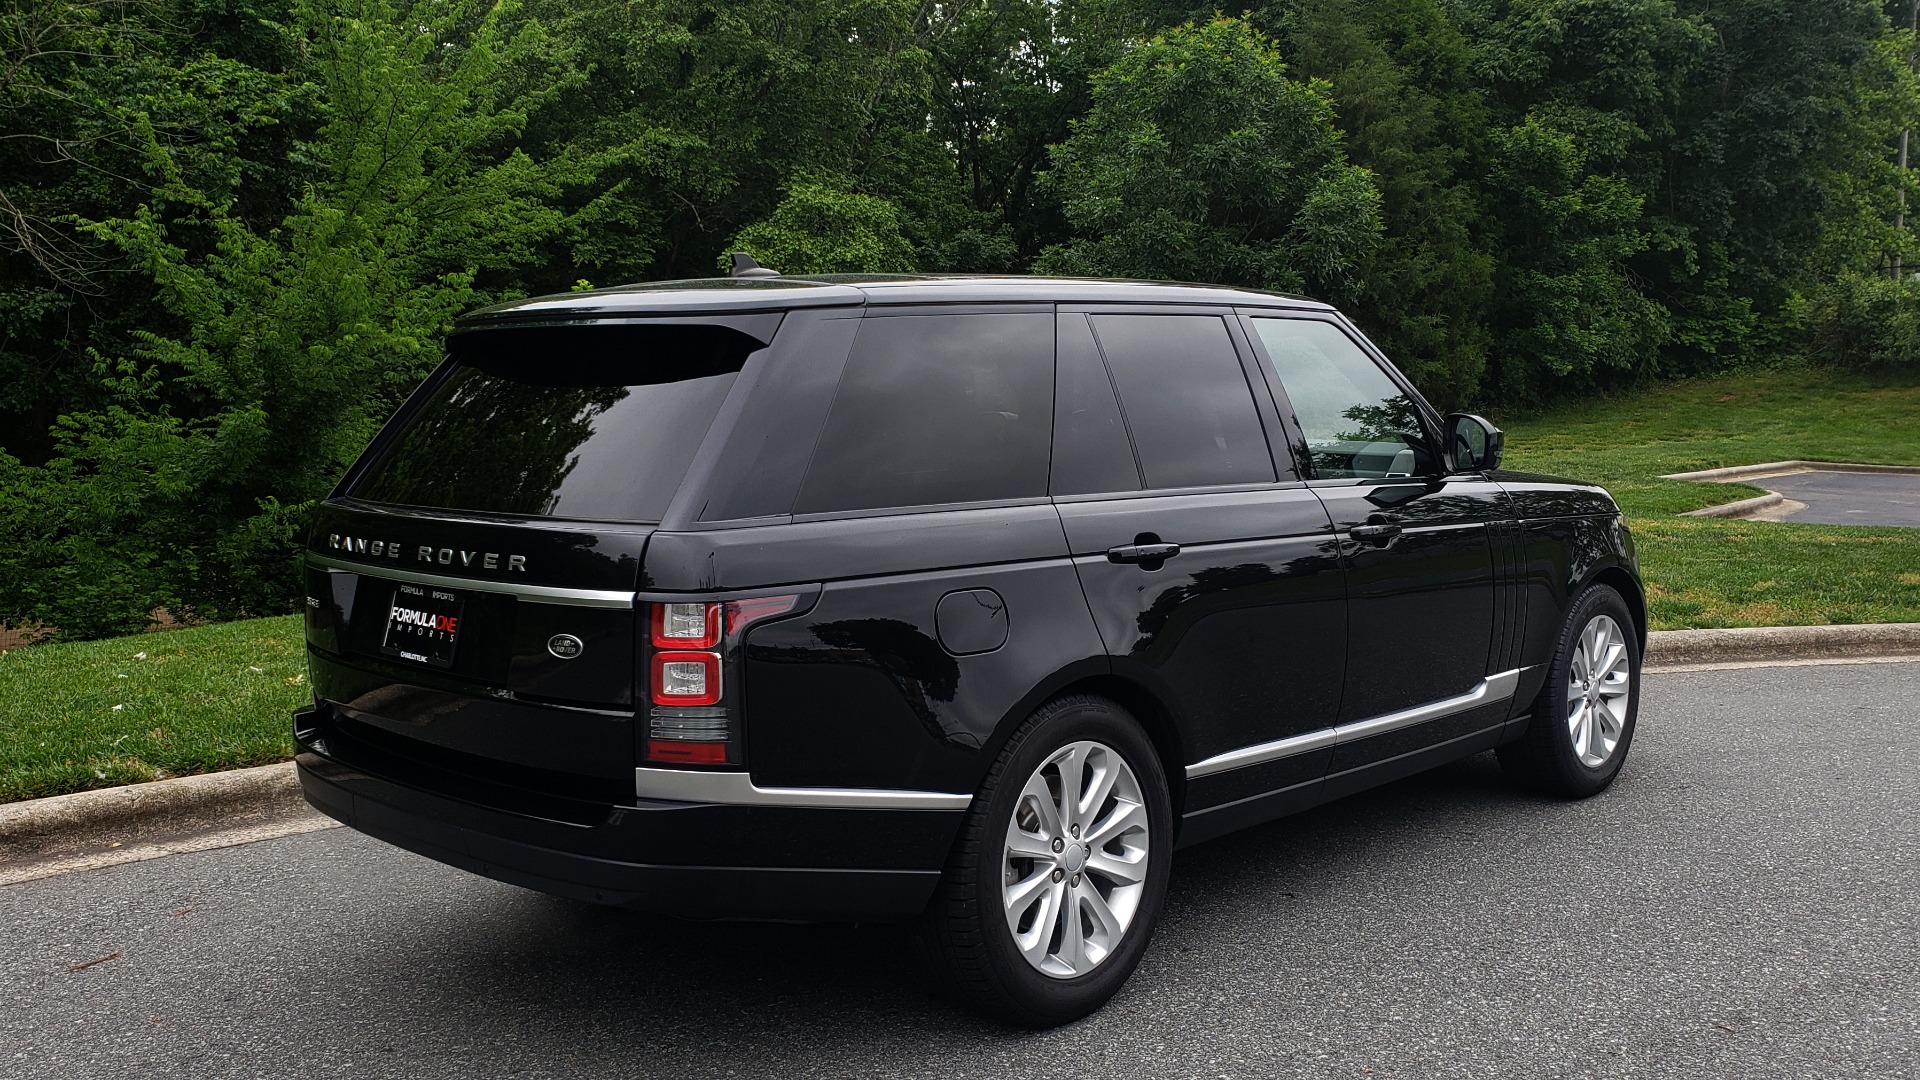 Used 2016 Land Rover RANGE ROVER HSE 3.0L / NAV / PANO / VENT SEATS / REARVIEW / BLIND SPOT for sale Sold at Formula Imports in Charlotte NC 28227 4